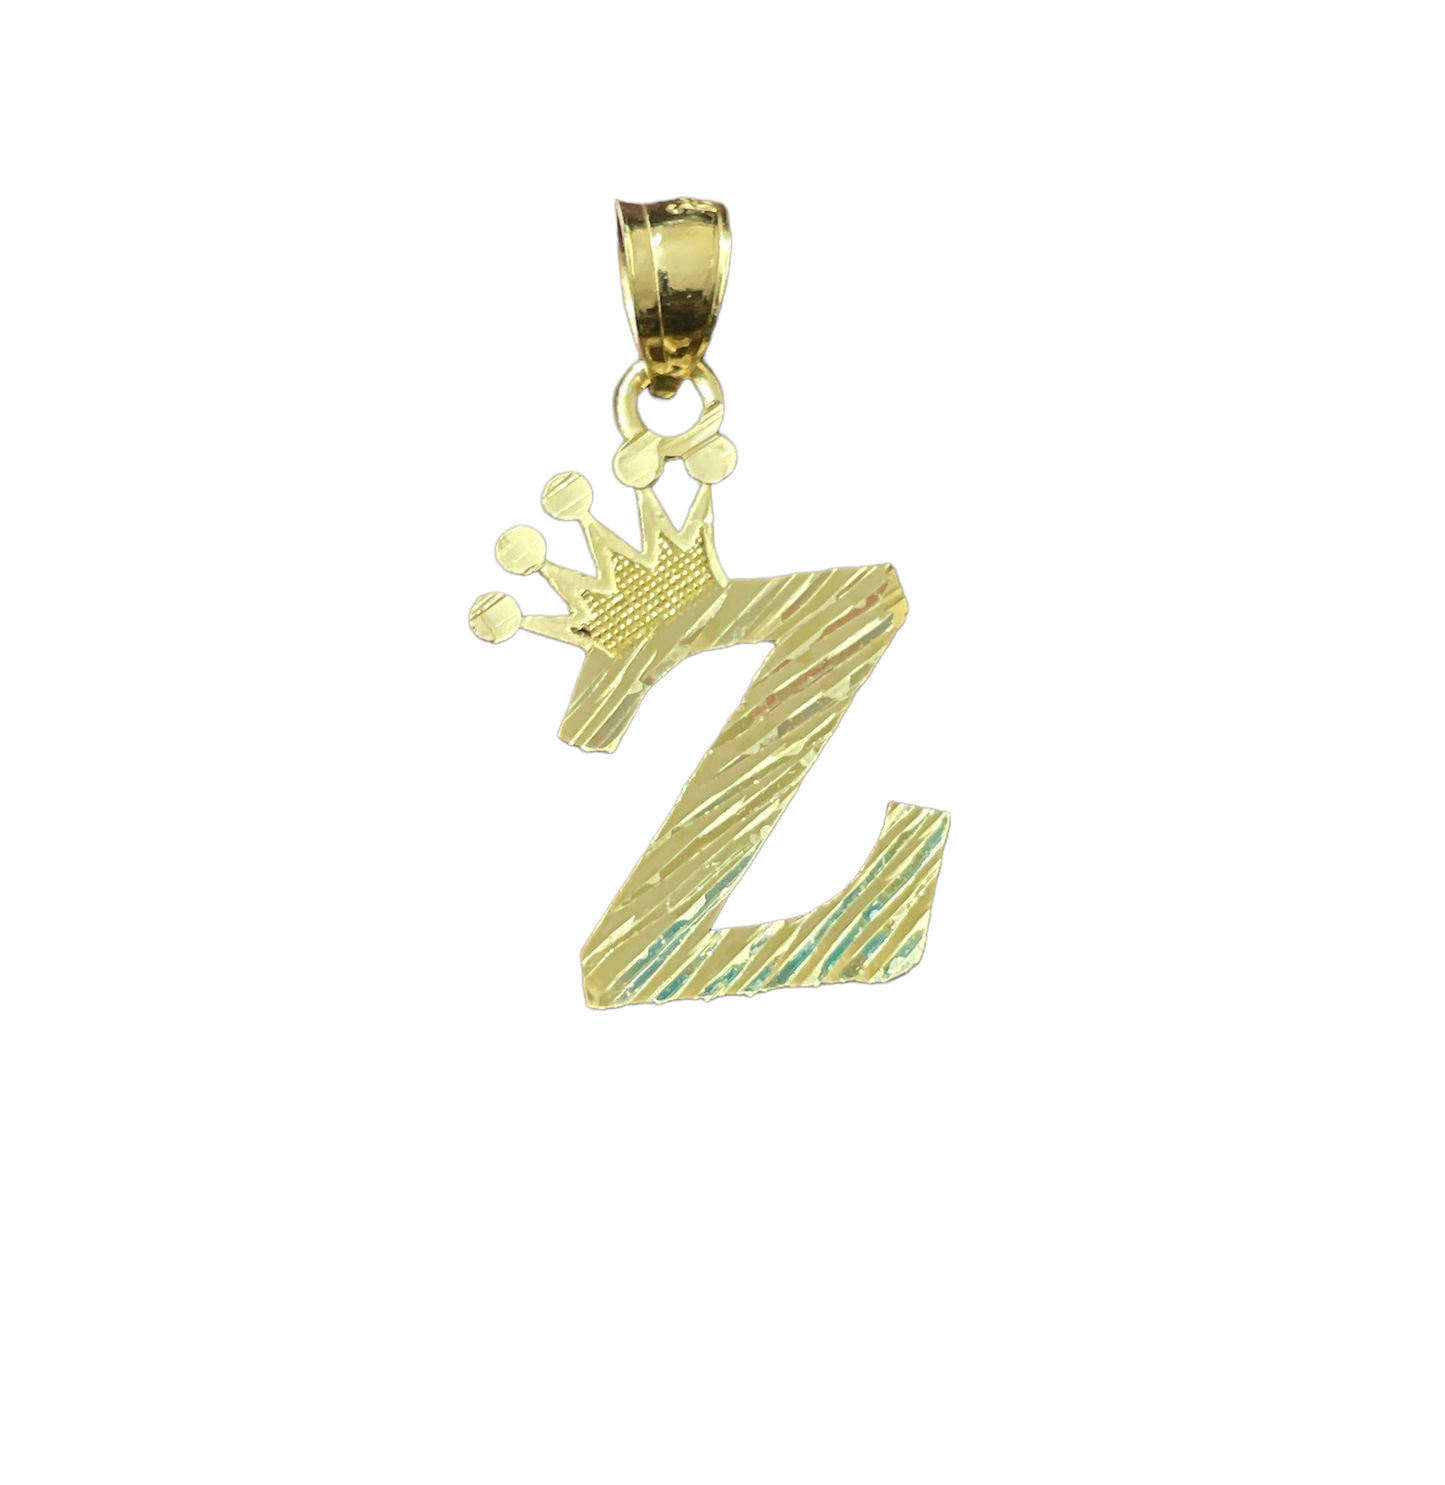 10K Y.Gold Initial Charm Letter "Z" with Crown